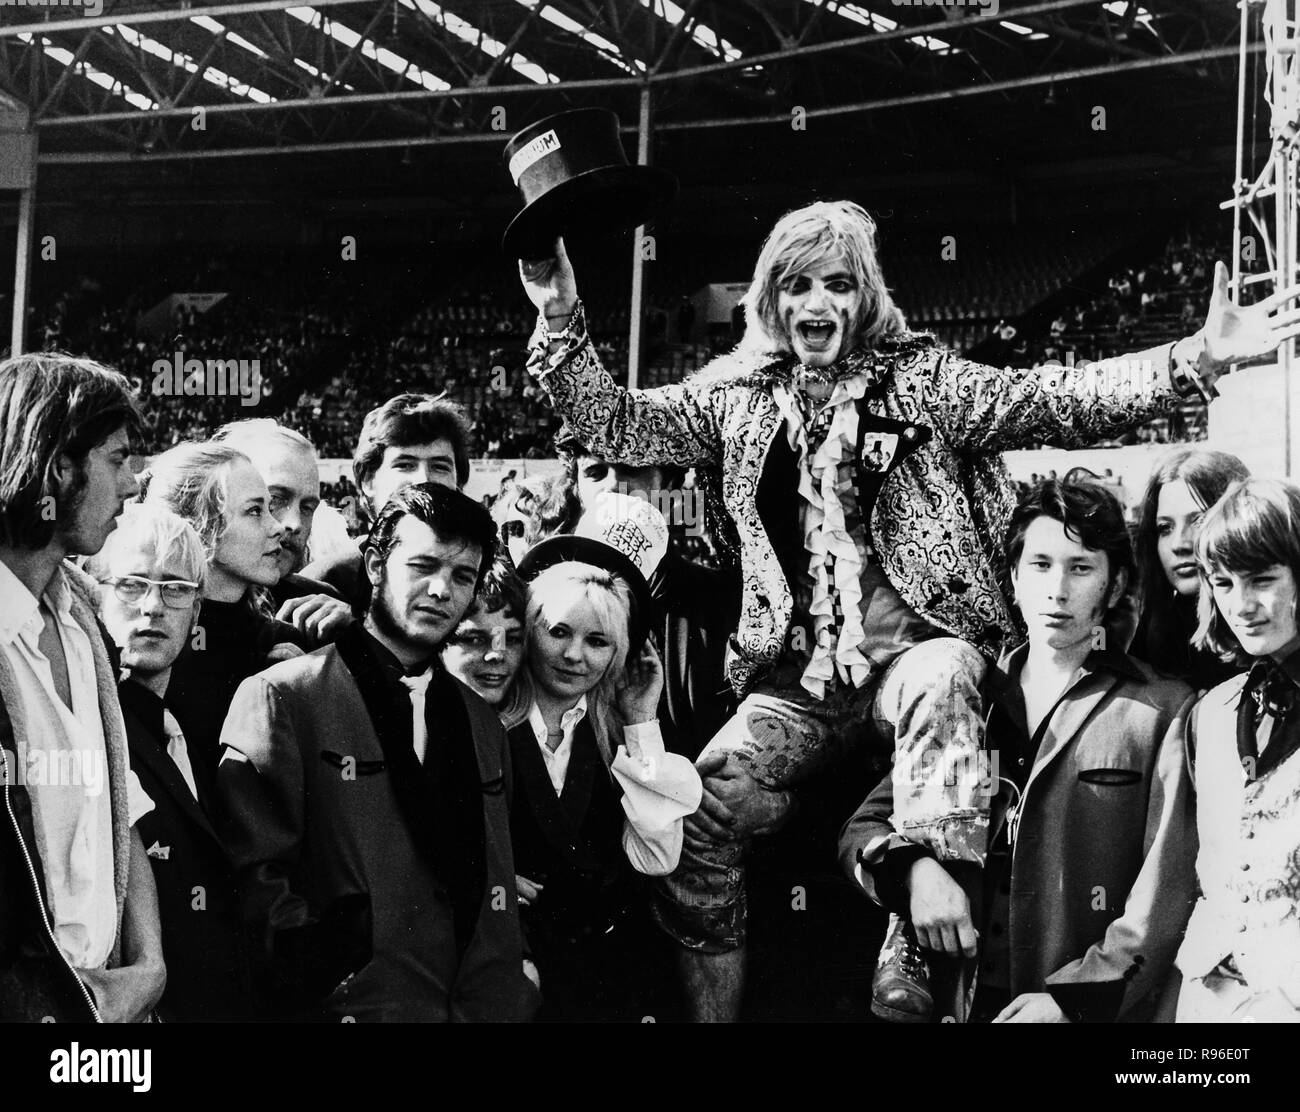 screaming lord sutch, london rock and roll show, wembley stadium, london  1972 Stock Photo - Alamy